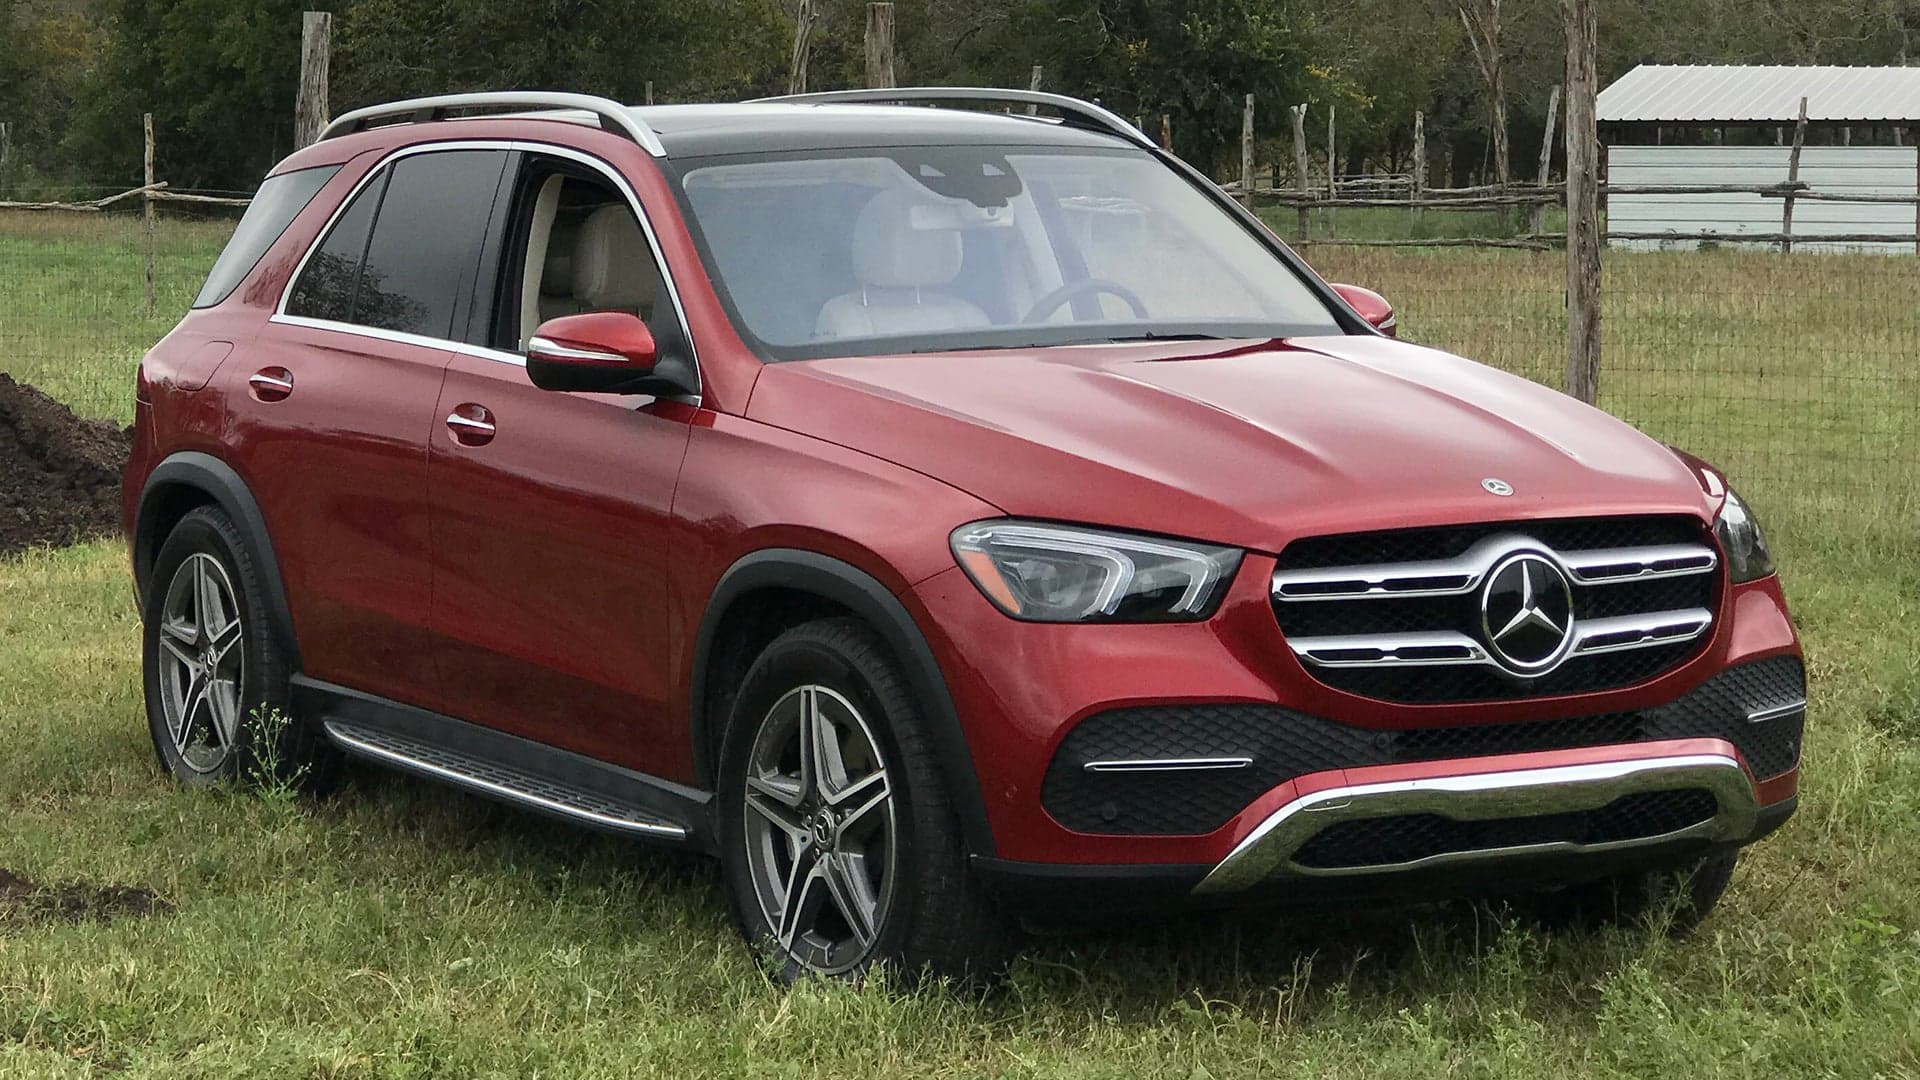 2020 Mercedes-Benz GLE-Class First Drive: Optional Tech Is Amazing, But So Is the Base Model